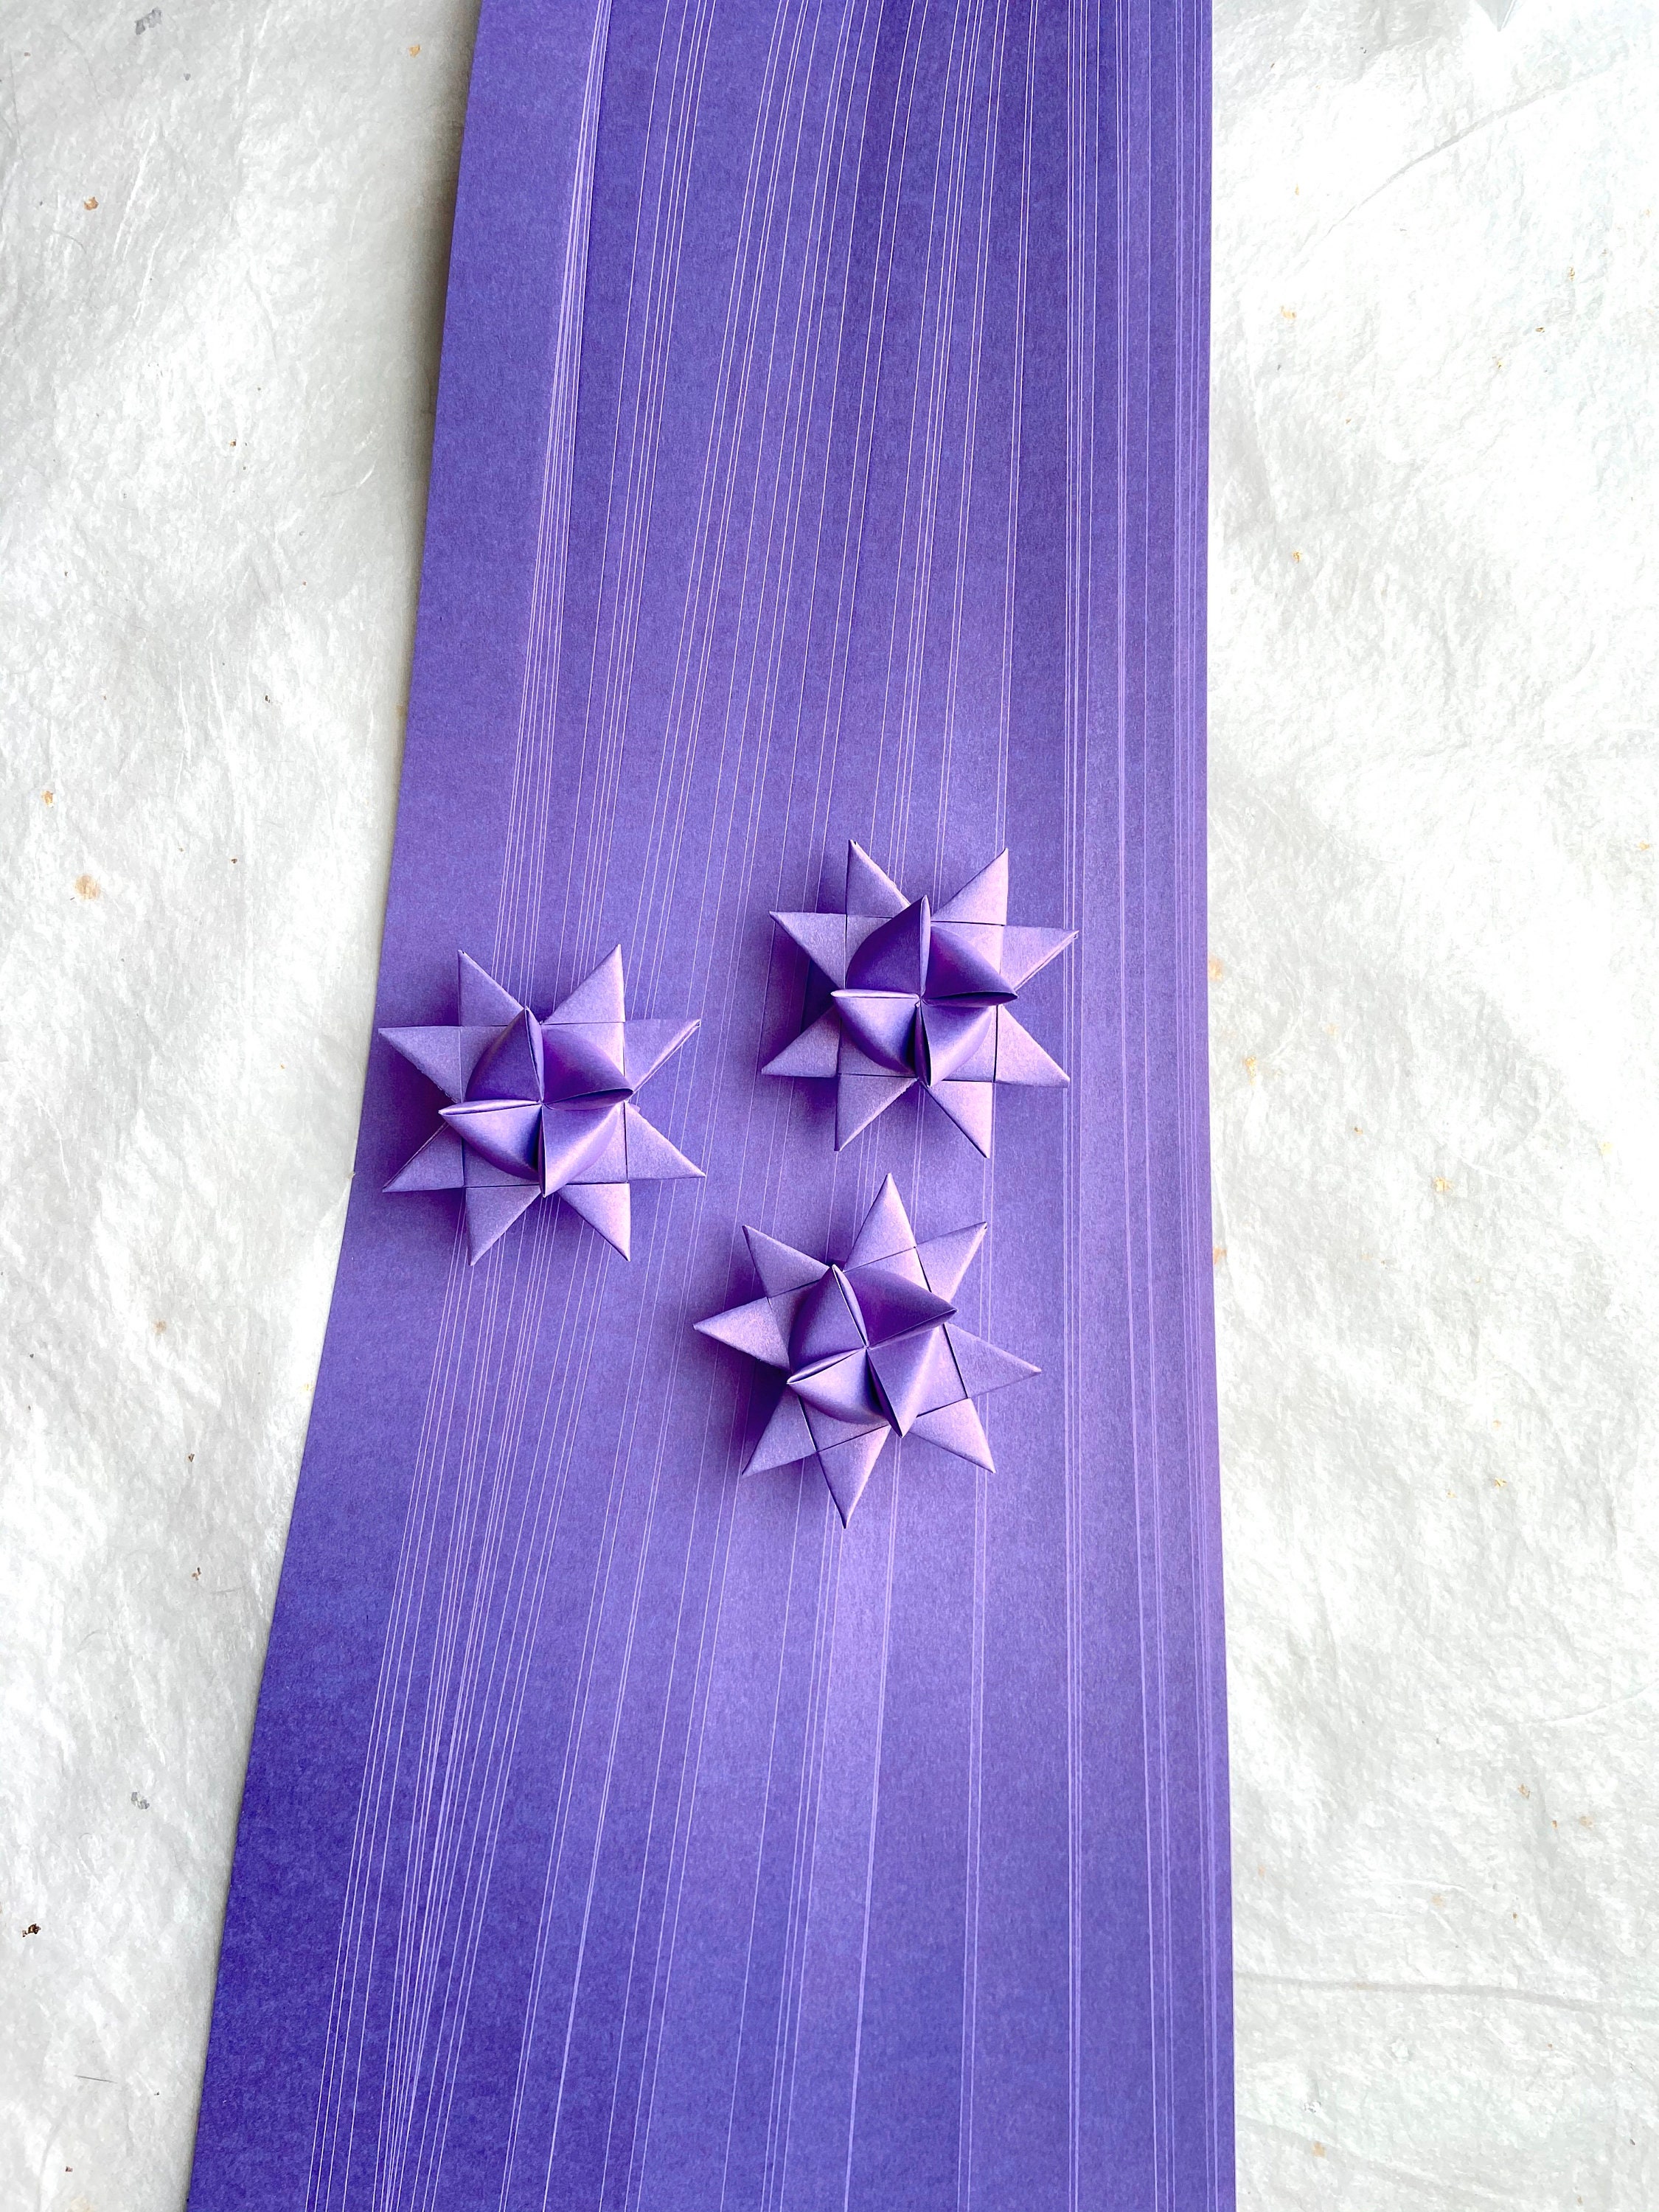  Paper Strips for German, Froebel, Moravian Stars & Weaving  ~1/4 Shimmer Silver : Handmade Products